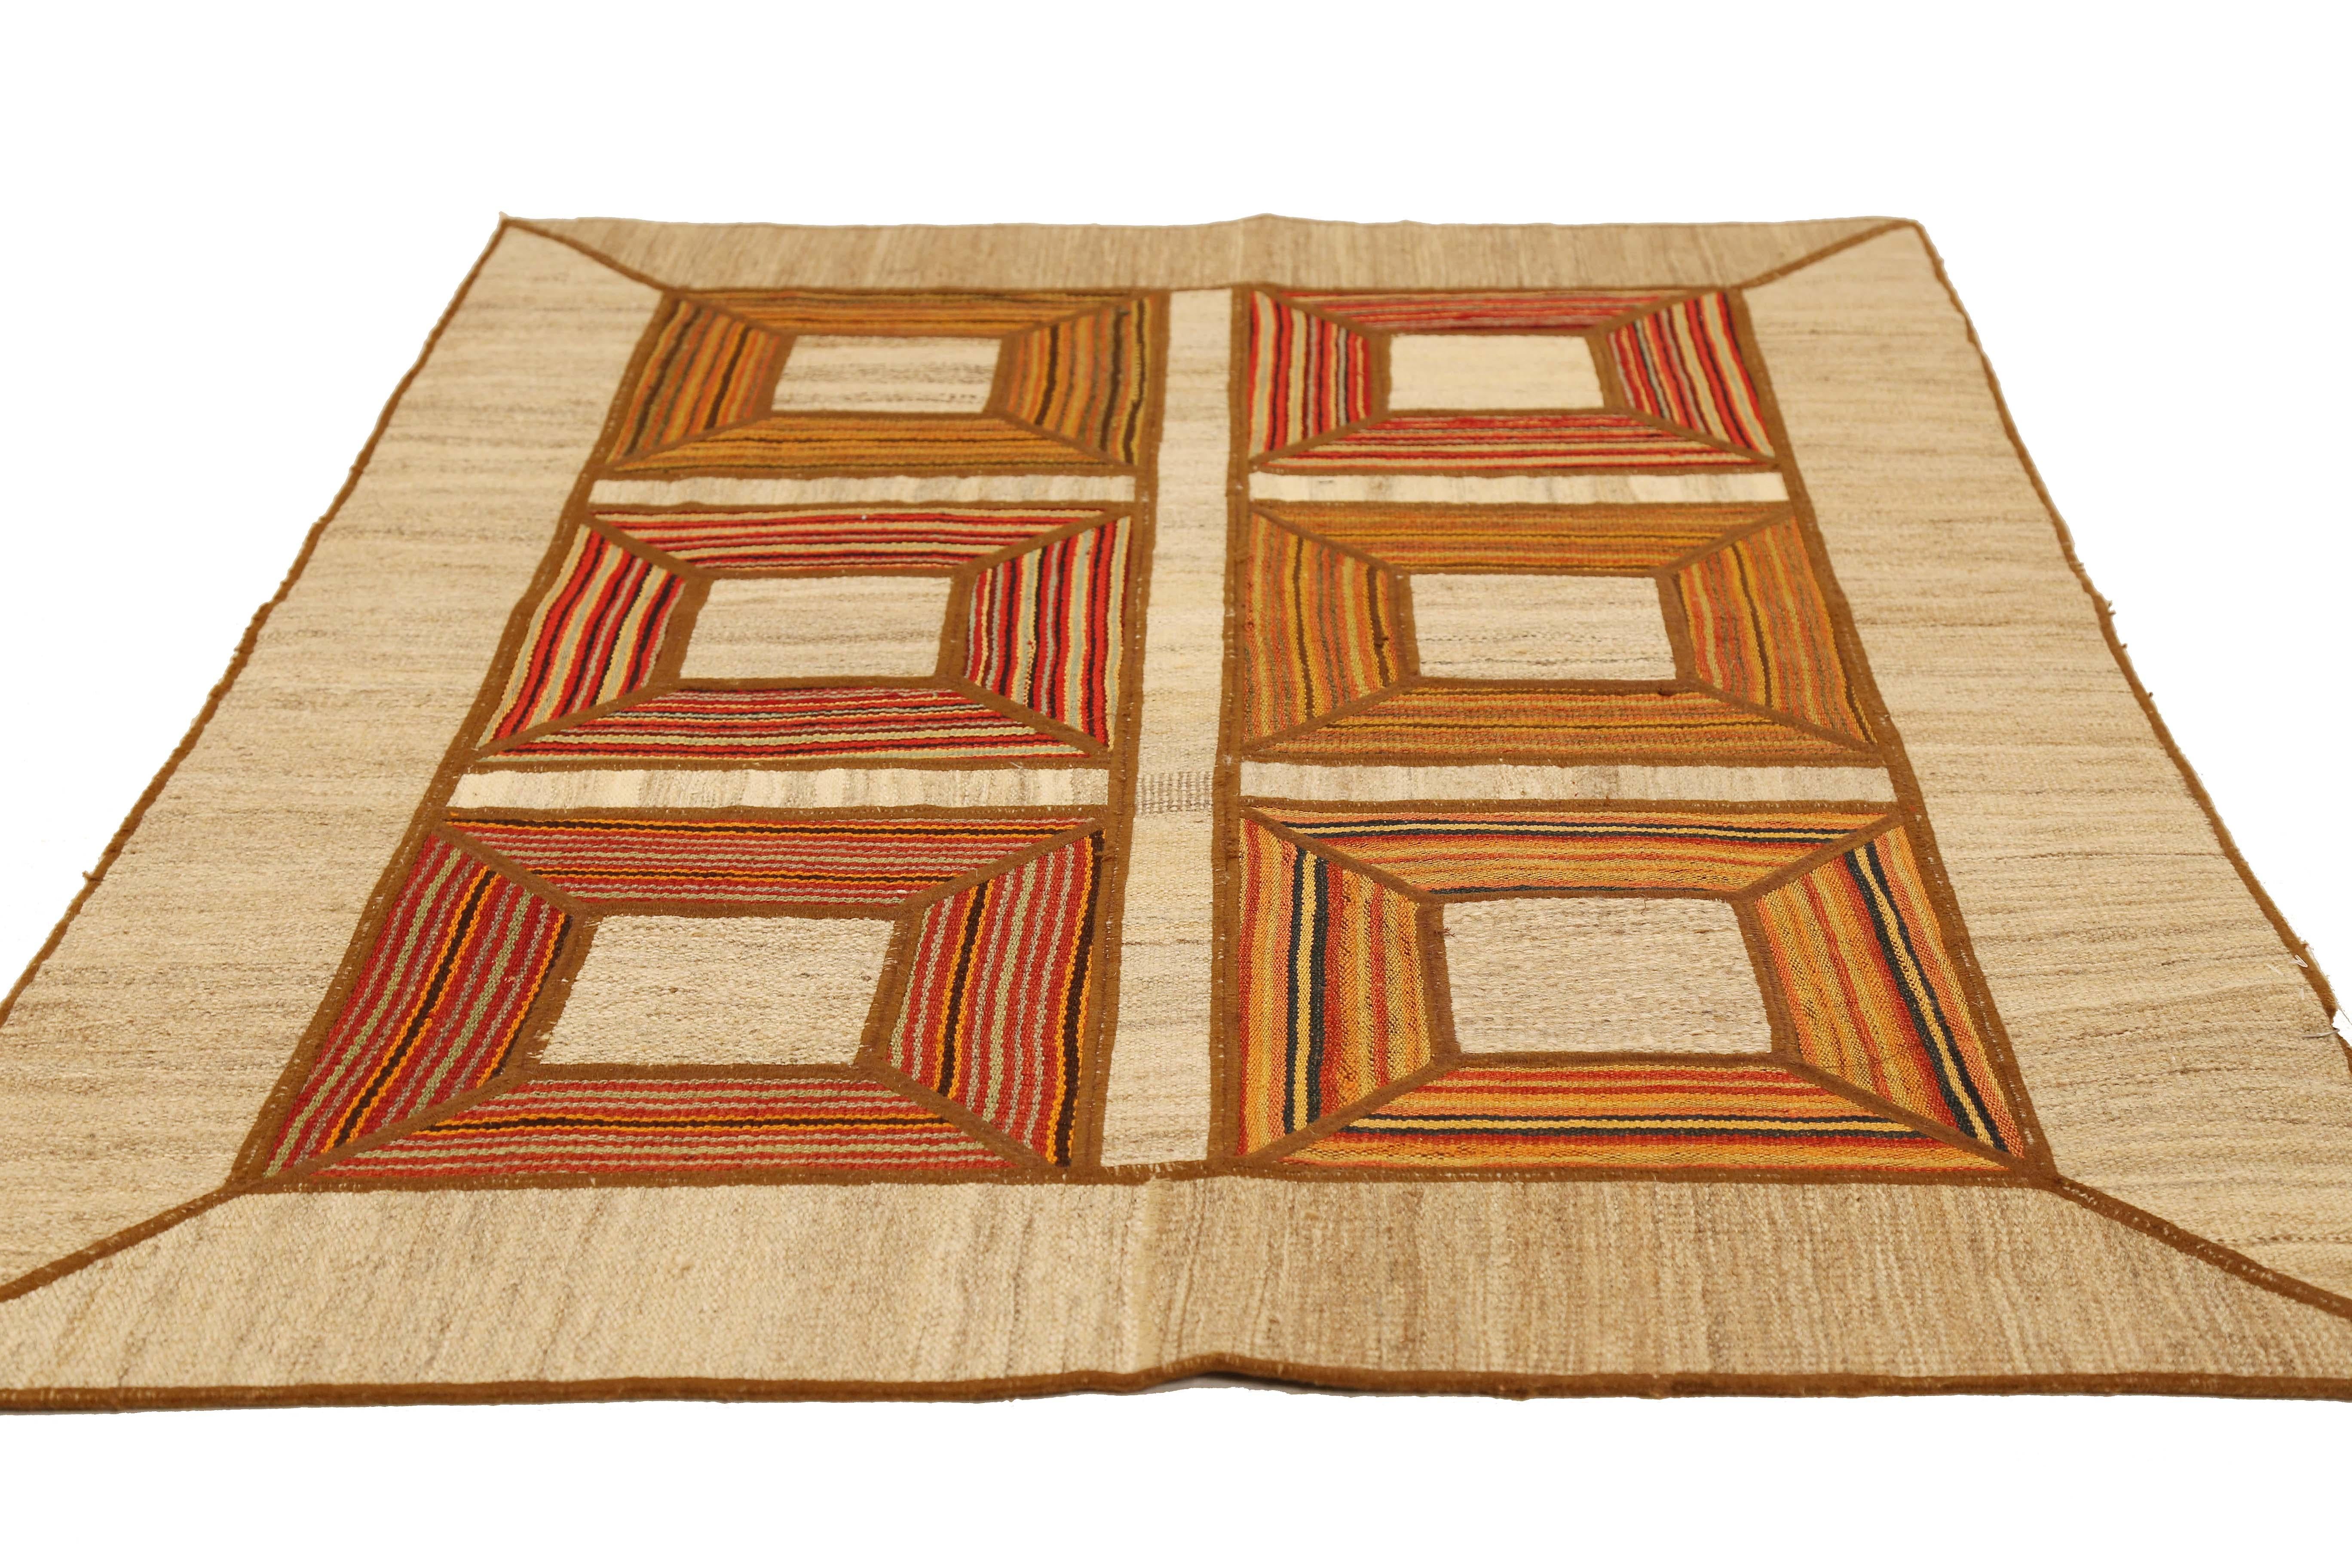 Modern Turkish rug handwoven from the finest sheep’s wool and colored with all-natural vegetable dyes that are safe for humans and pets. It’s a traditional Patch Kilim flat-weave design featuring square patterns in orange and red on a brown field.